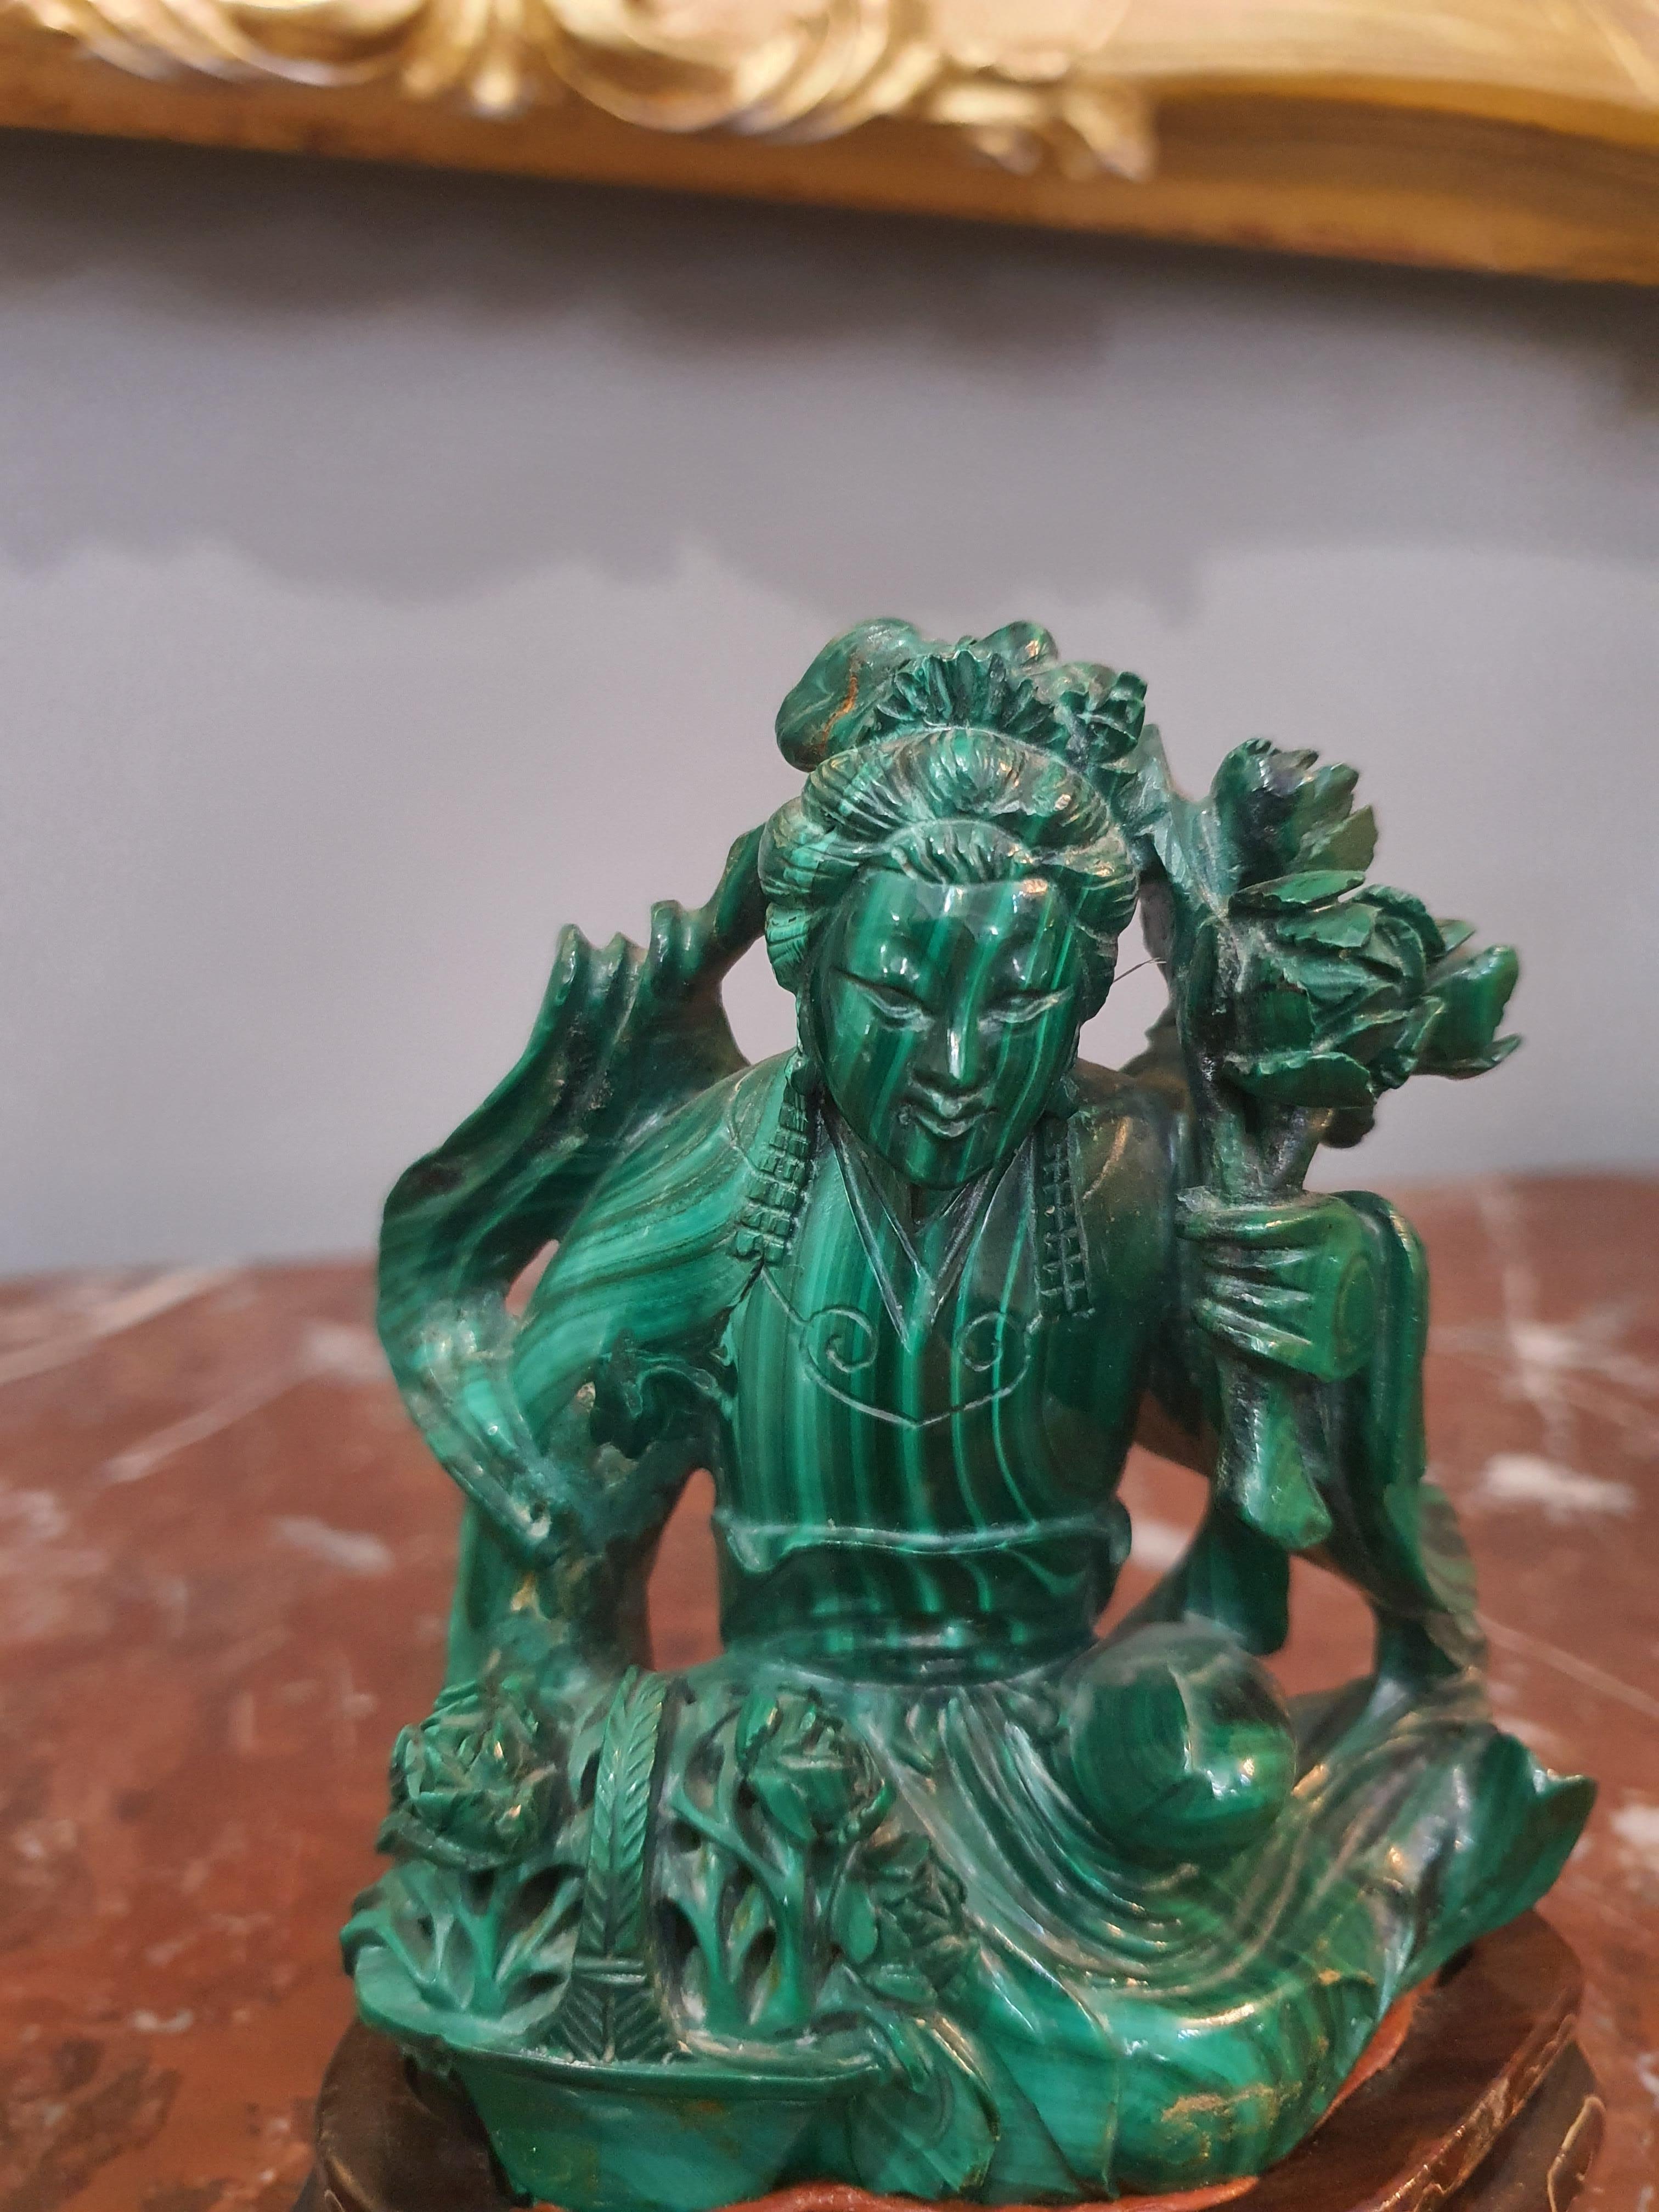 Valuable sculpture depicting an oriental figure. Made from a single block of flowery malachite. Mounted on a carved wooden base.